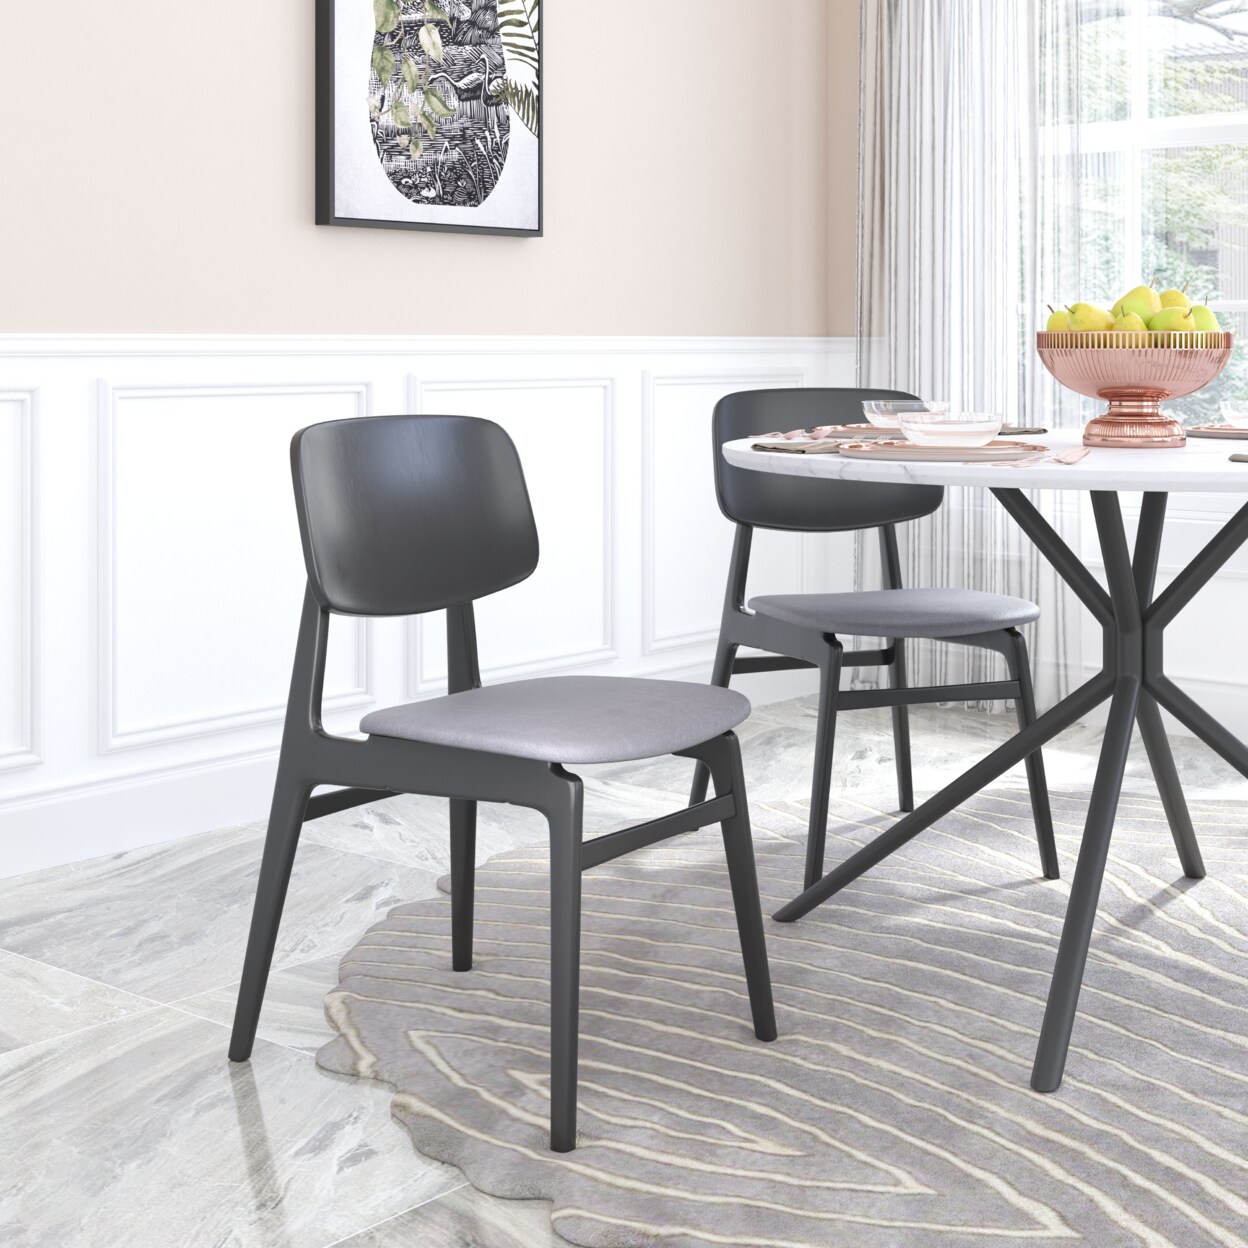 Zuo Modern Othello Dining Chair (Set of 2)